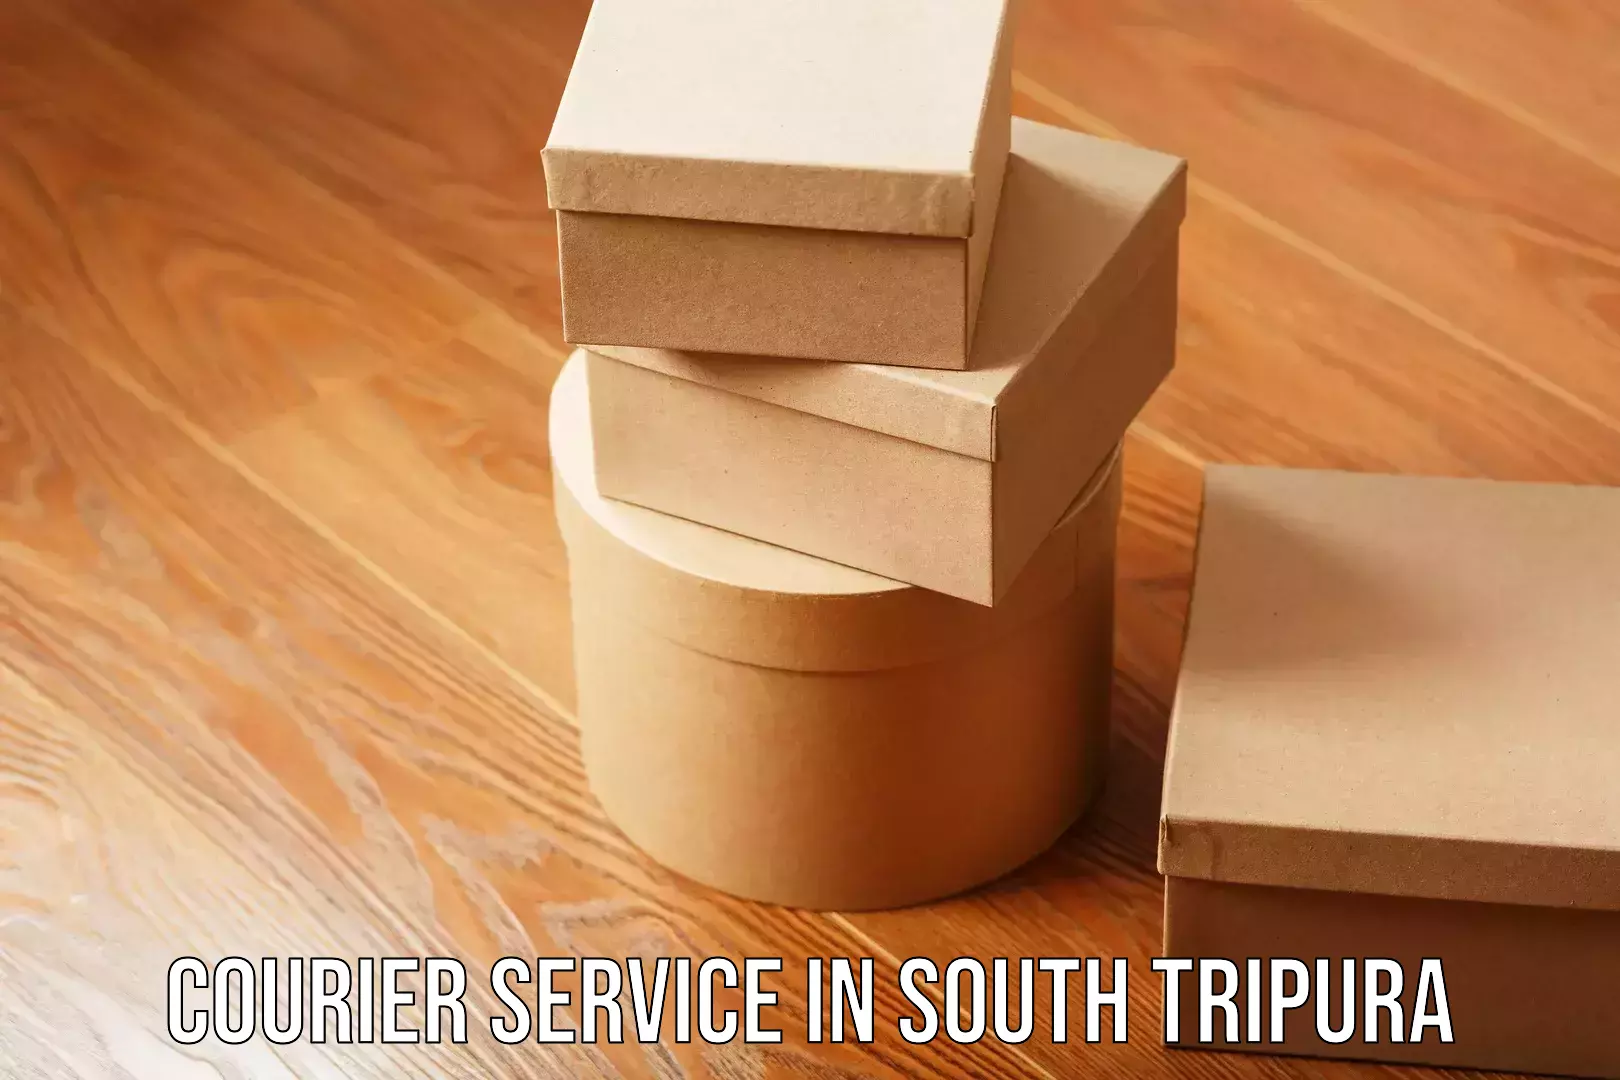 Sustainable delivery practices in South Tripura